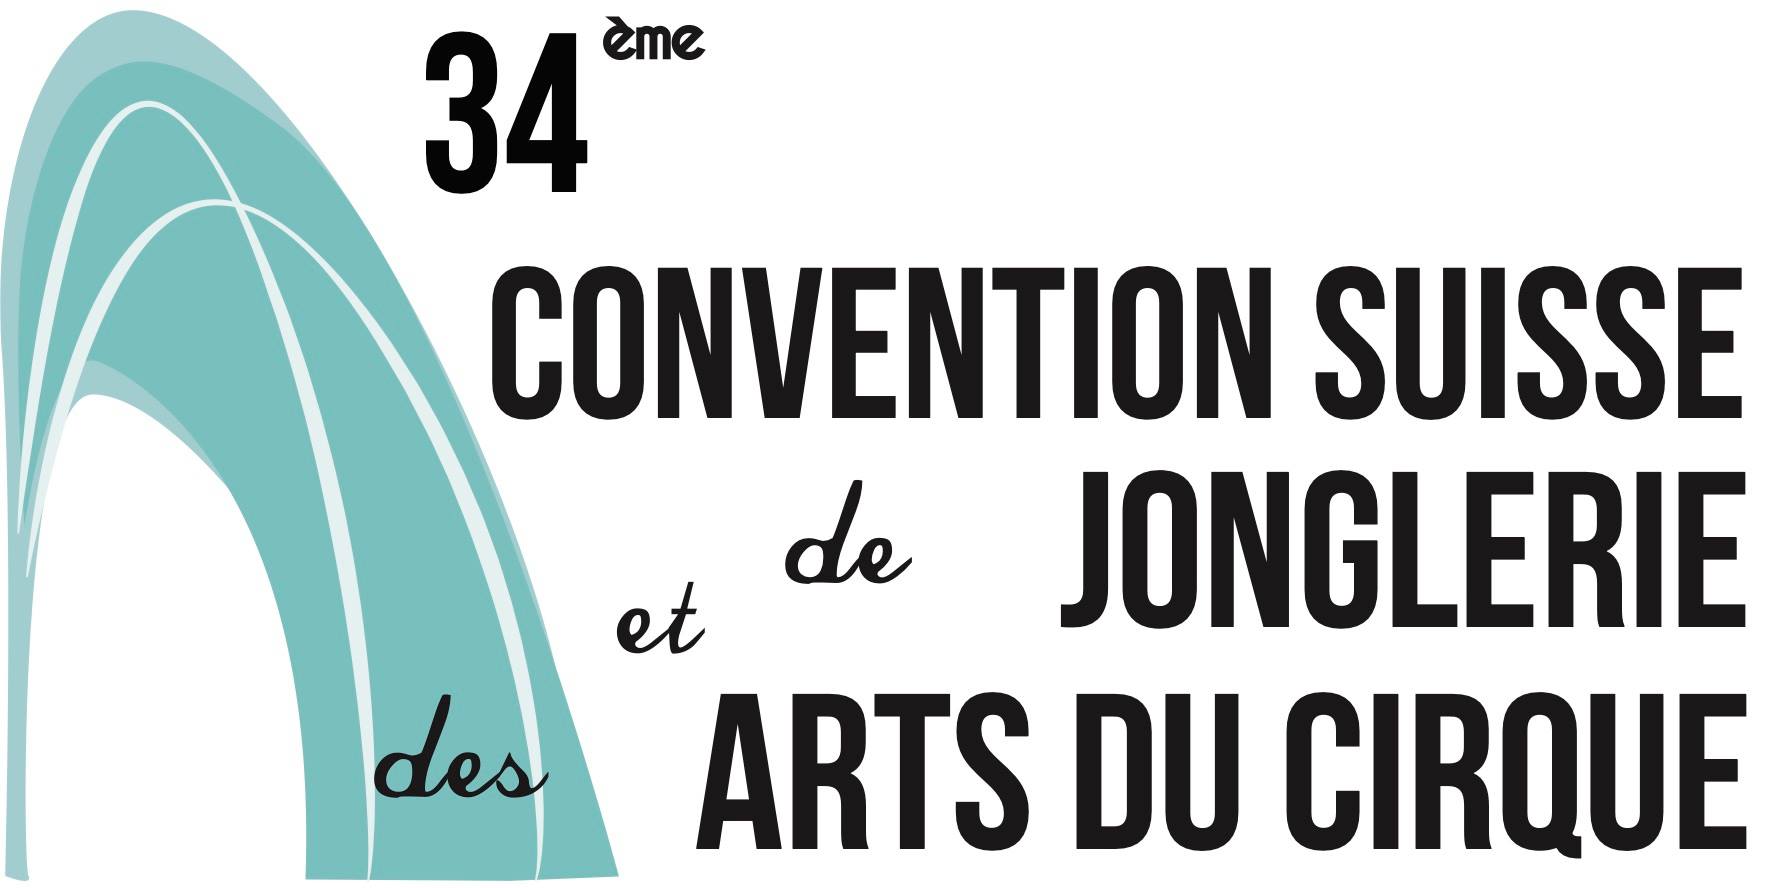 34th Swiss Juggling Convention Information in 2020